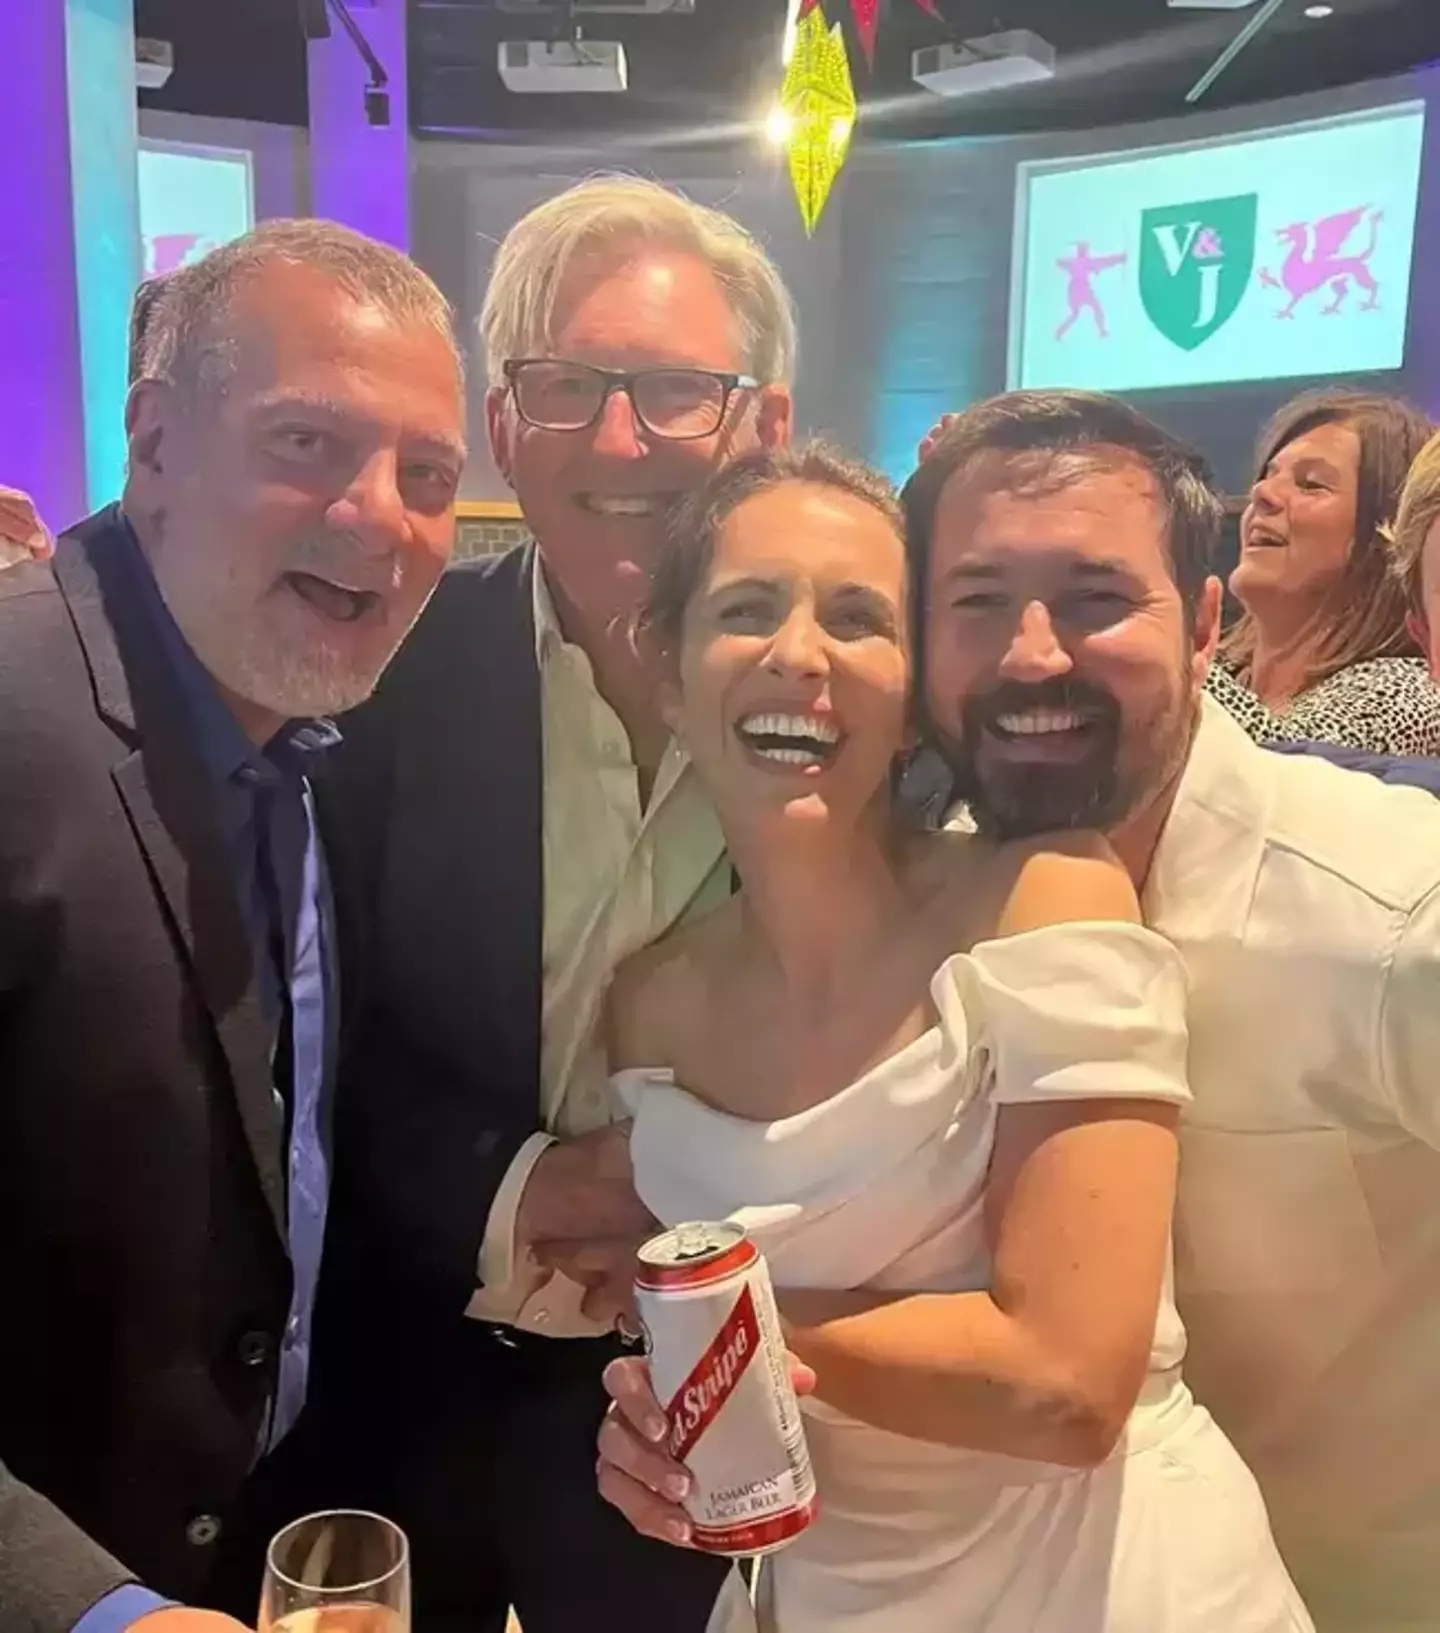 Line of Duty trio Vicky McClure, Adrian Dunbar and Martin Compston all shared a wholesome reunion to celebrate their co-star getting married.